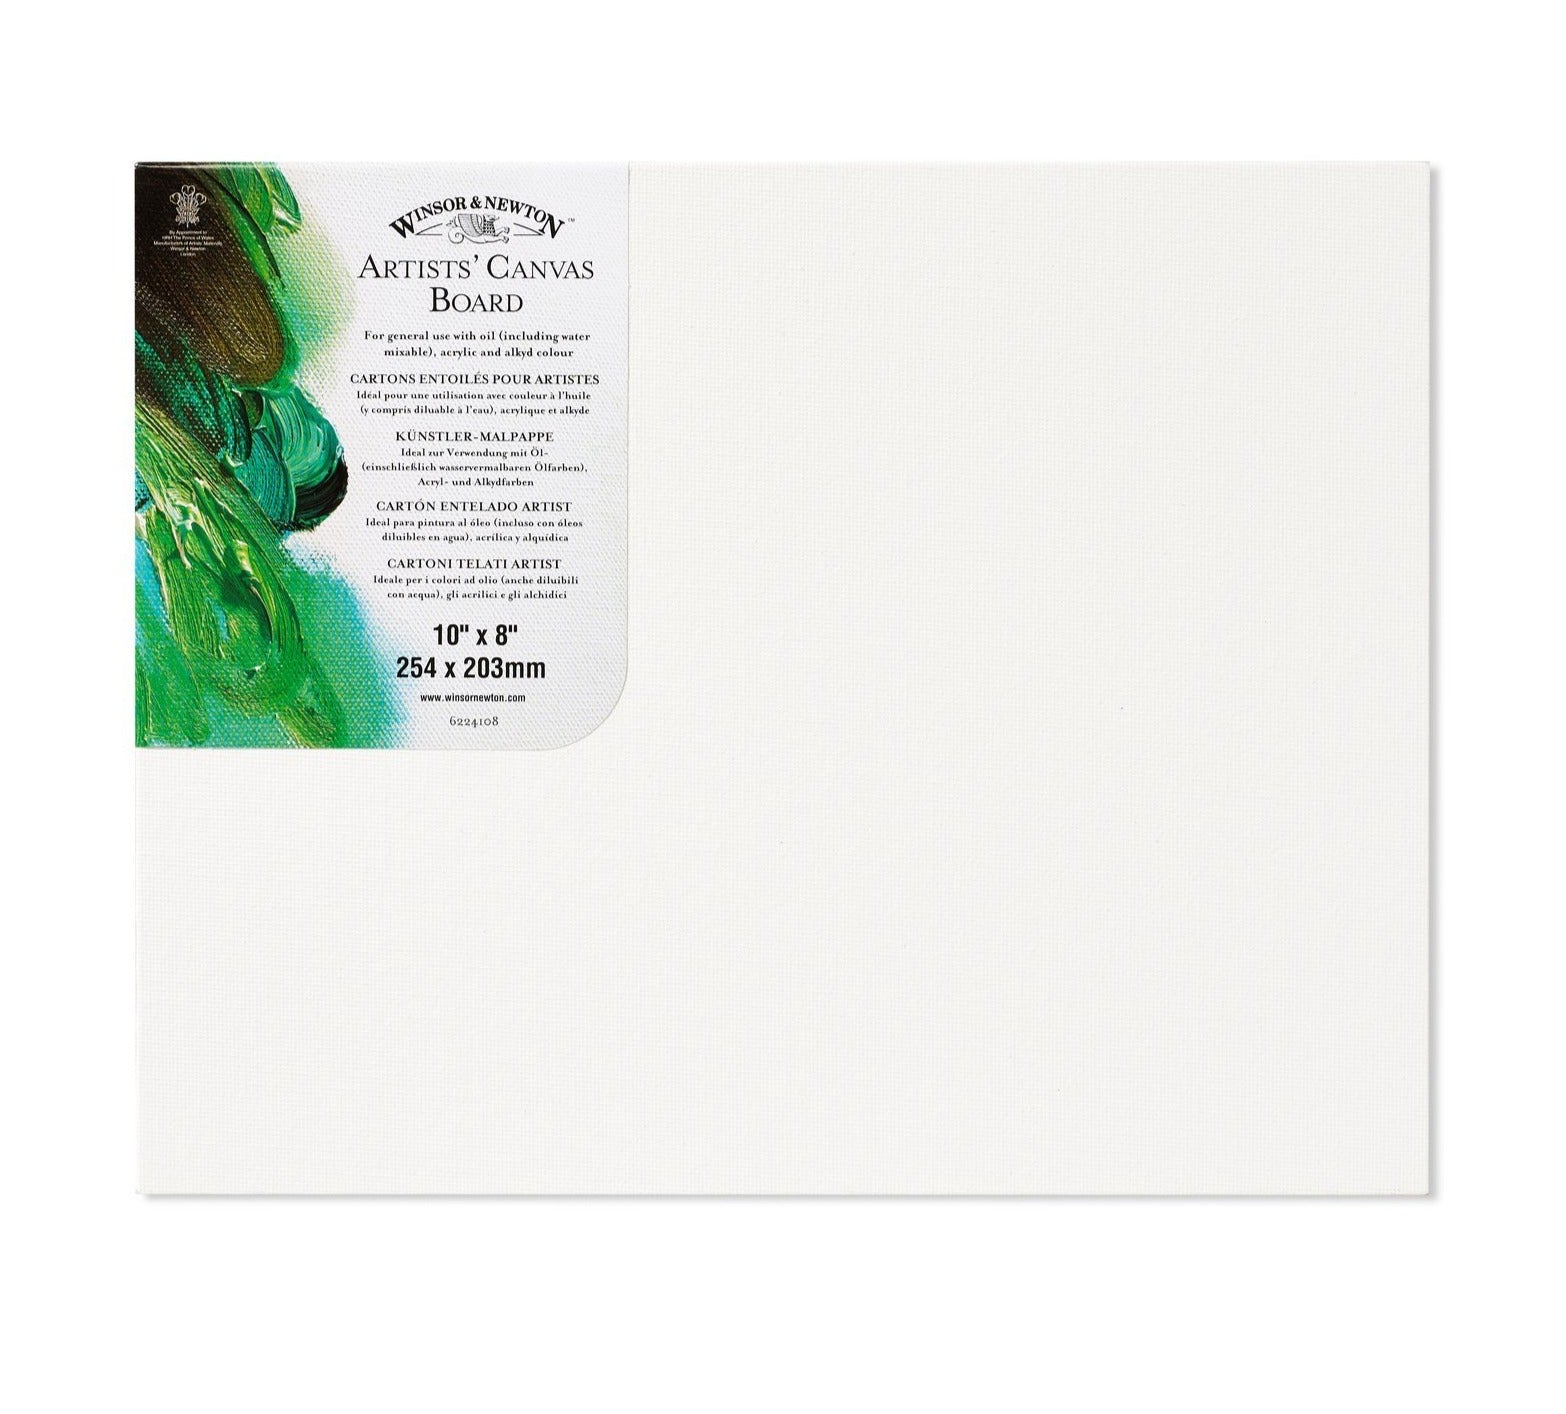 Winsor & Newton Artists' Canvas Boards are made from cotton, excellent quality and triple primed using acid free coating. They are light and portable, a  medium grain surface.